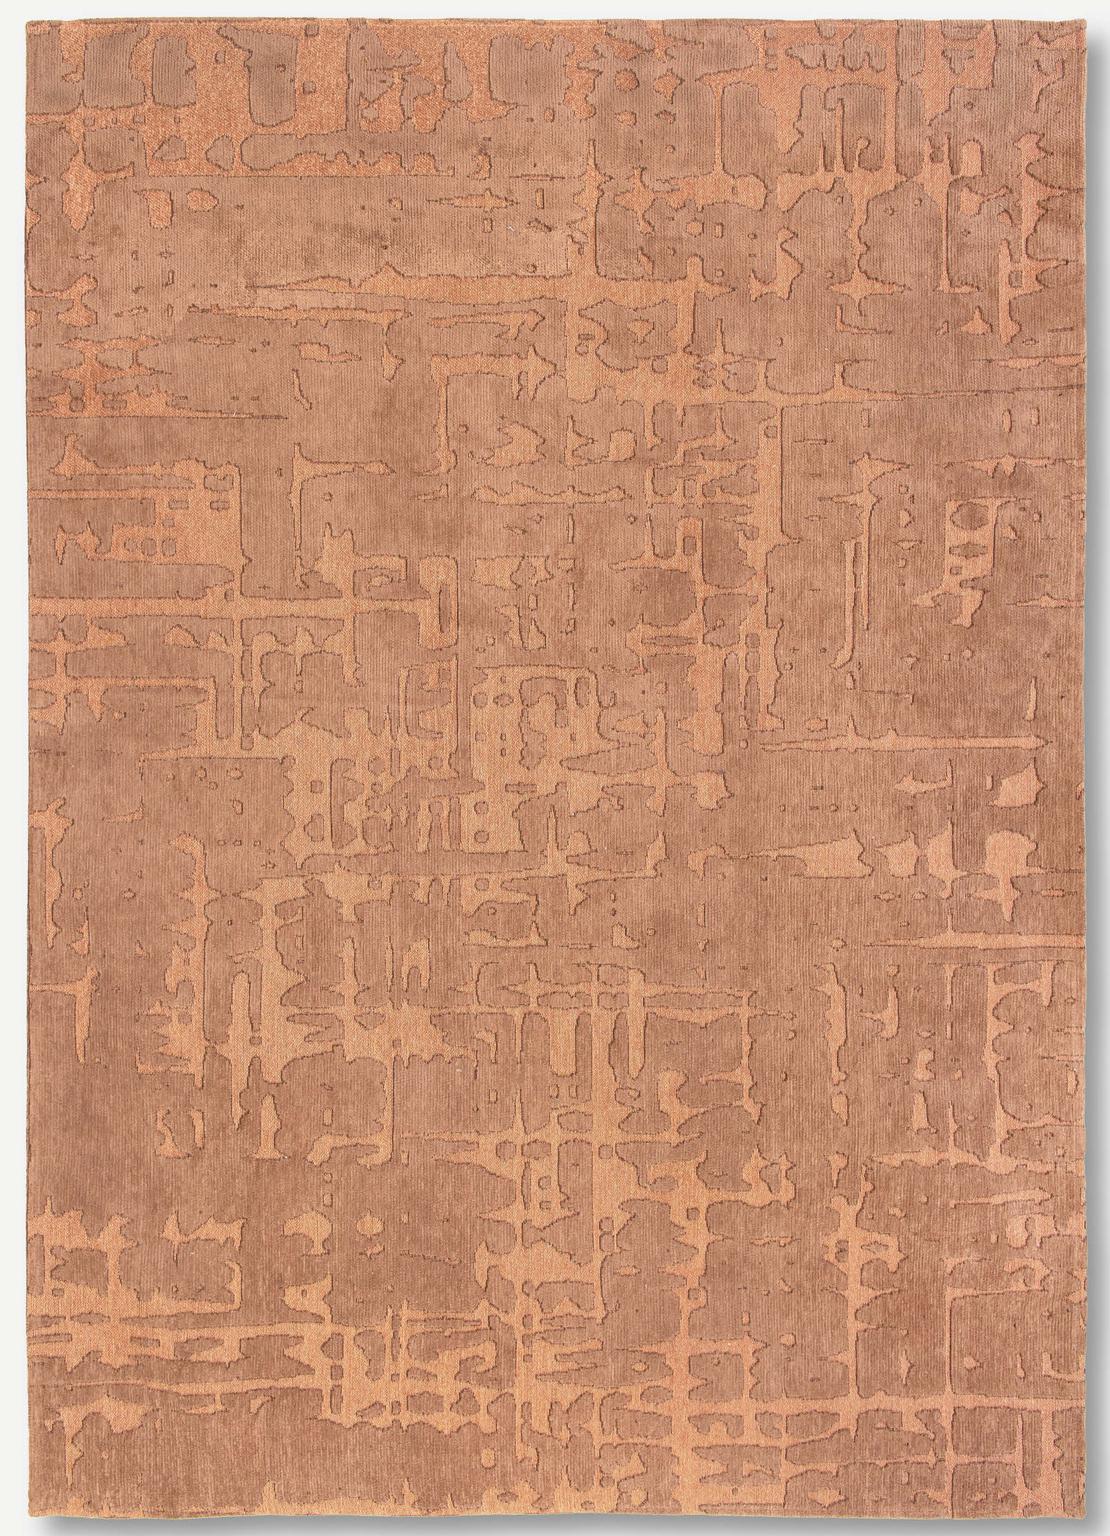 Abstract Brown Belgian Rug ☞ Size: 6' 7" x 9' 2" (200 x 280 cm)